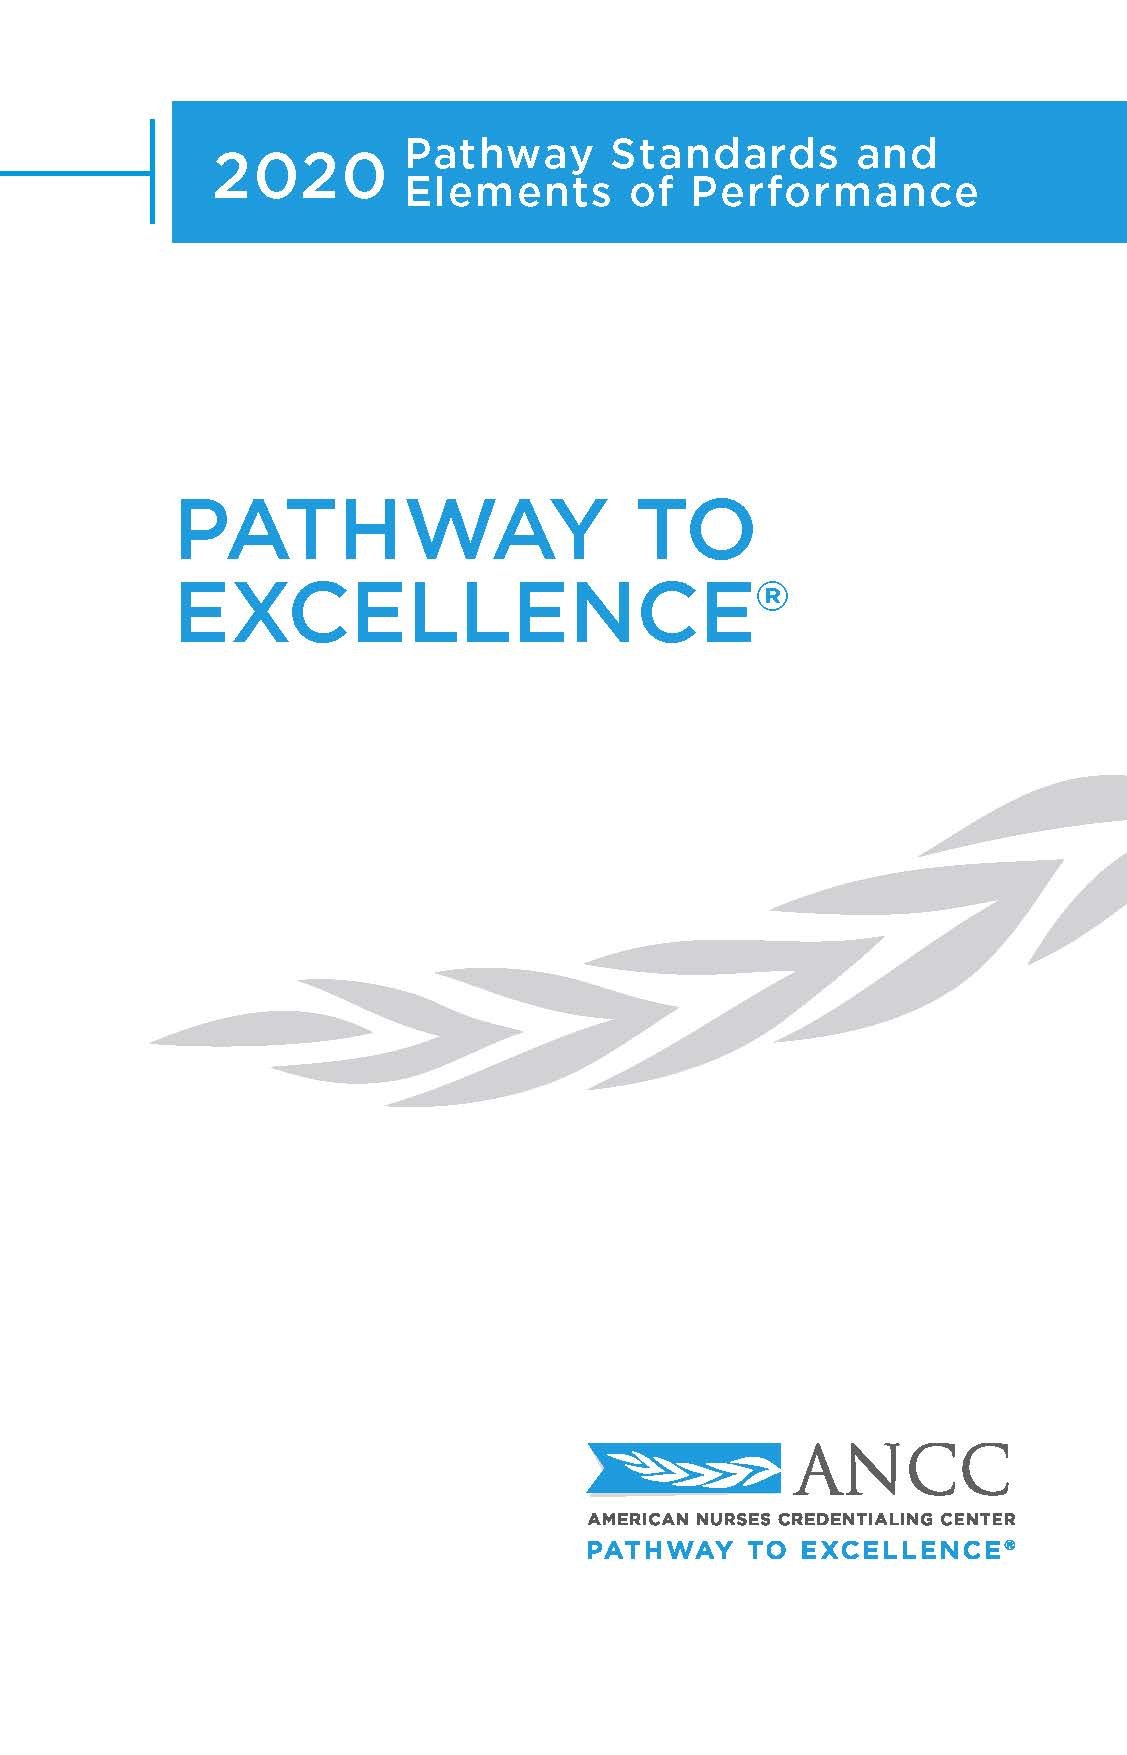 Overview of the ANCC Pathway to Excellence Program | ANA